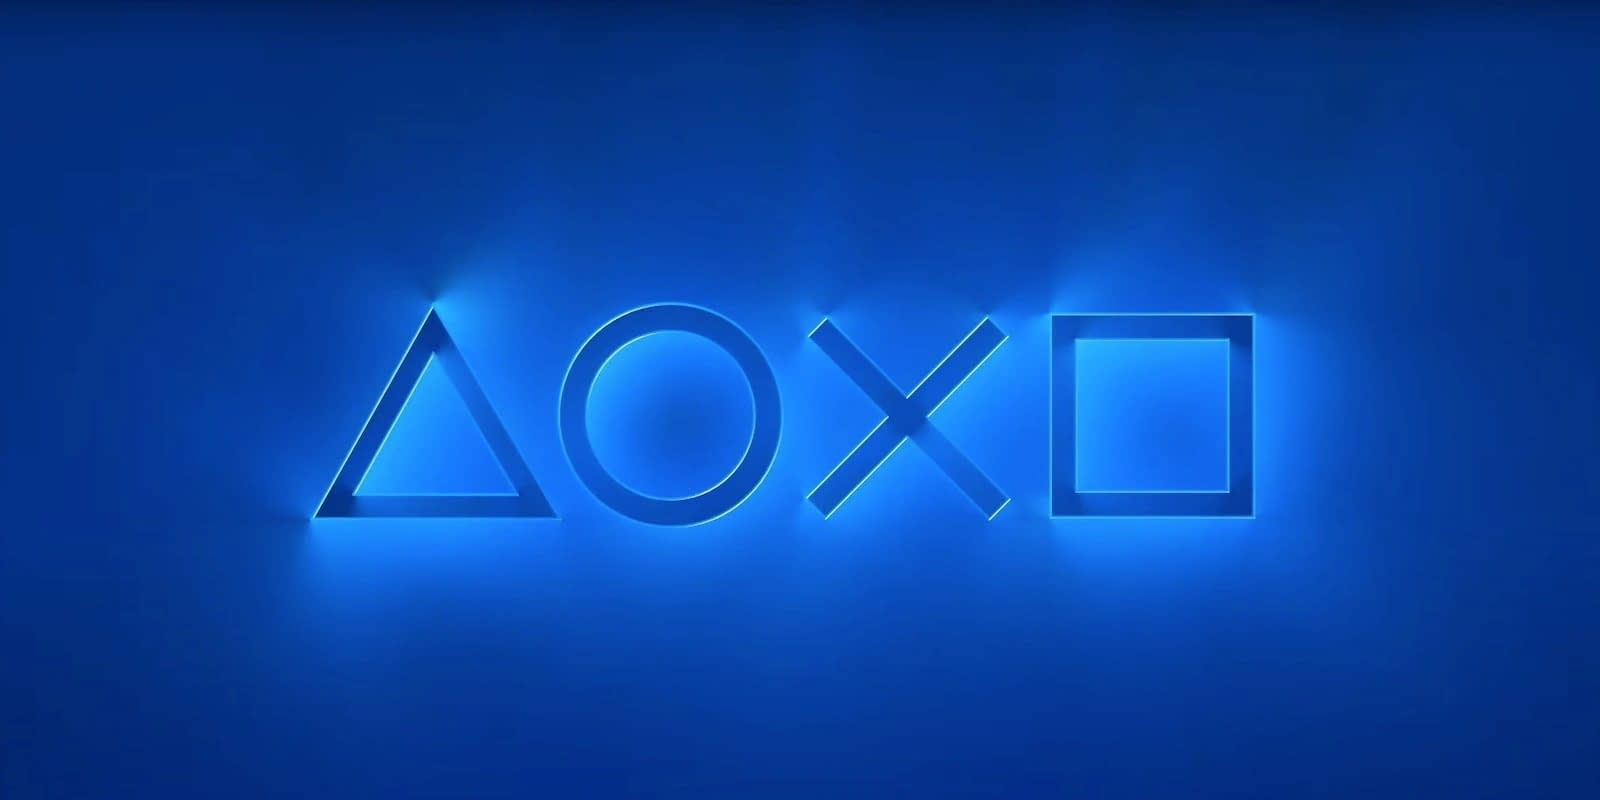 PlayStation Showcase 2023: how to watch and what to expect